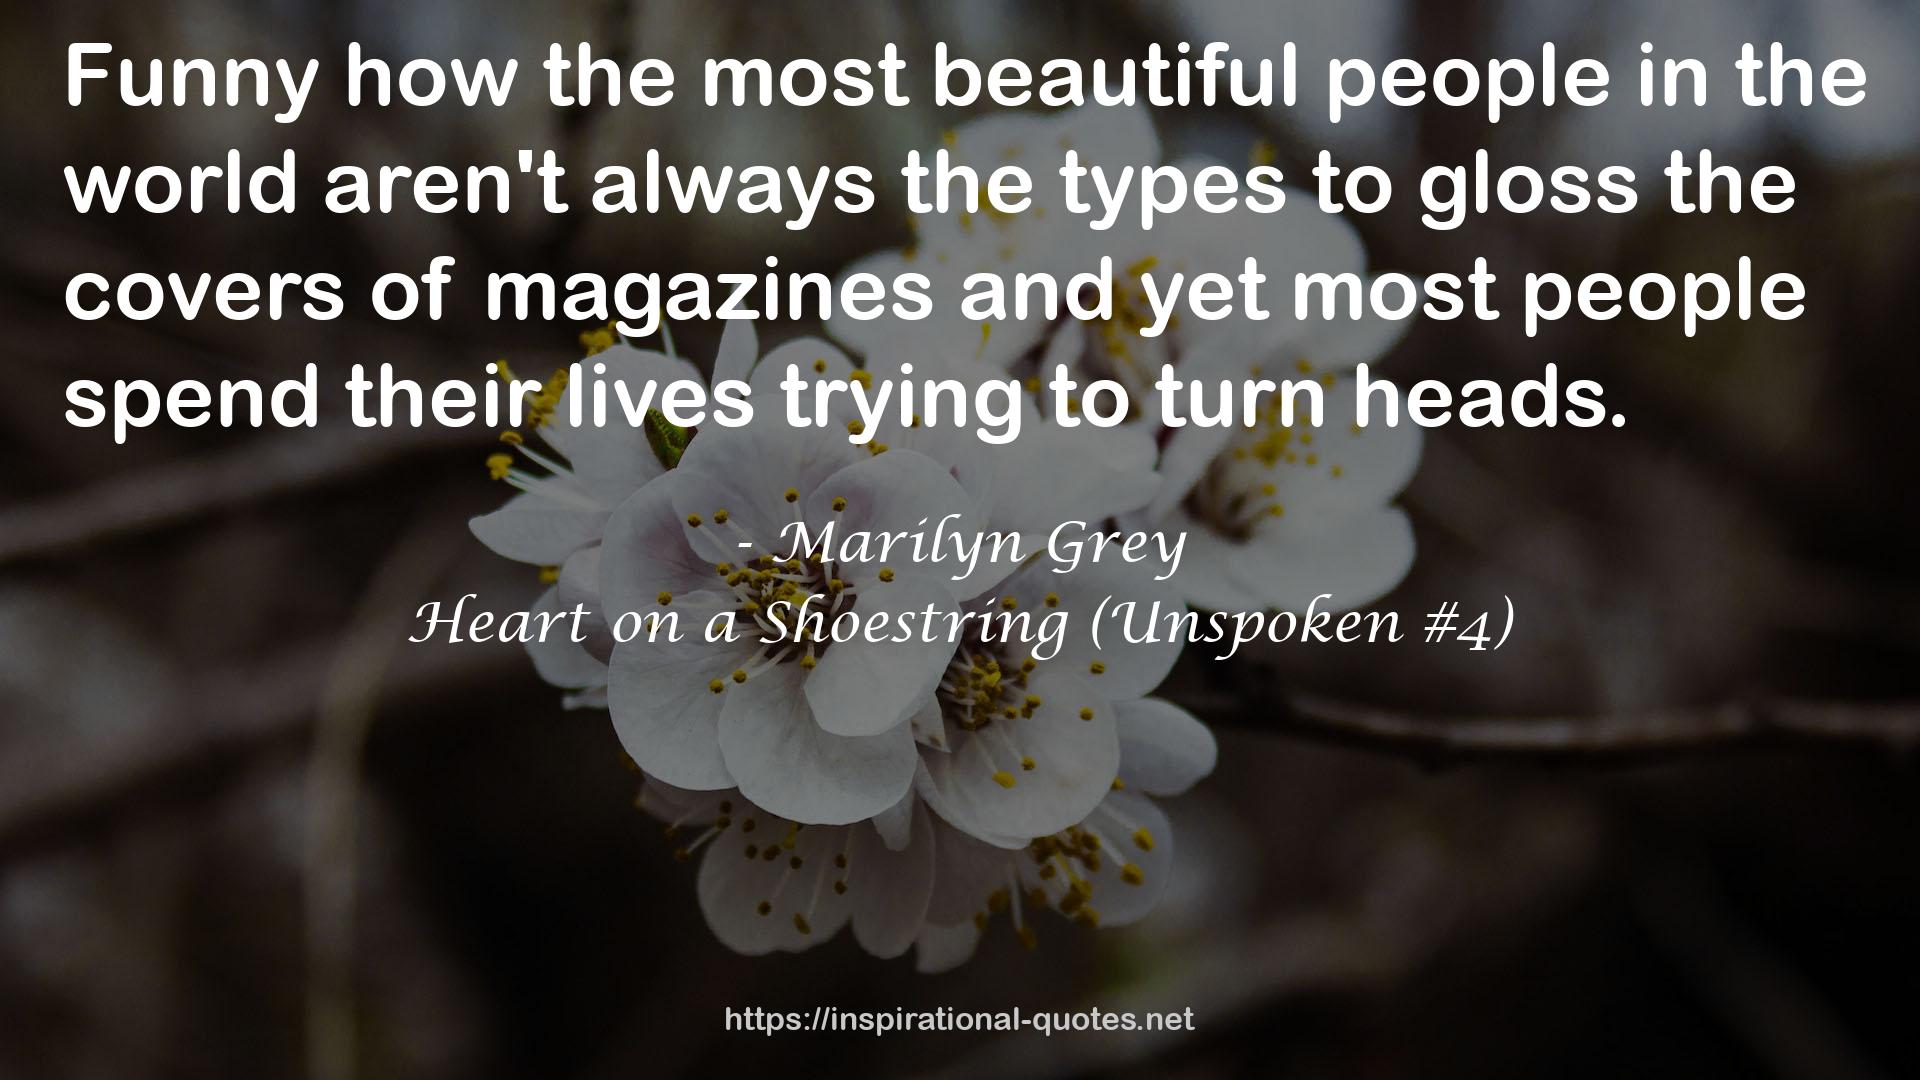 Heart on a Shoestring (Unspoken #4) QUOTES